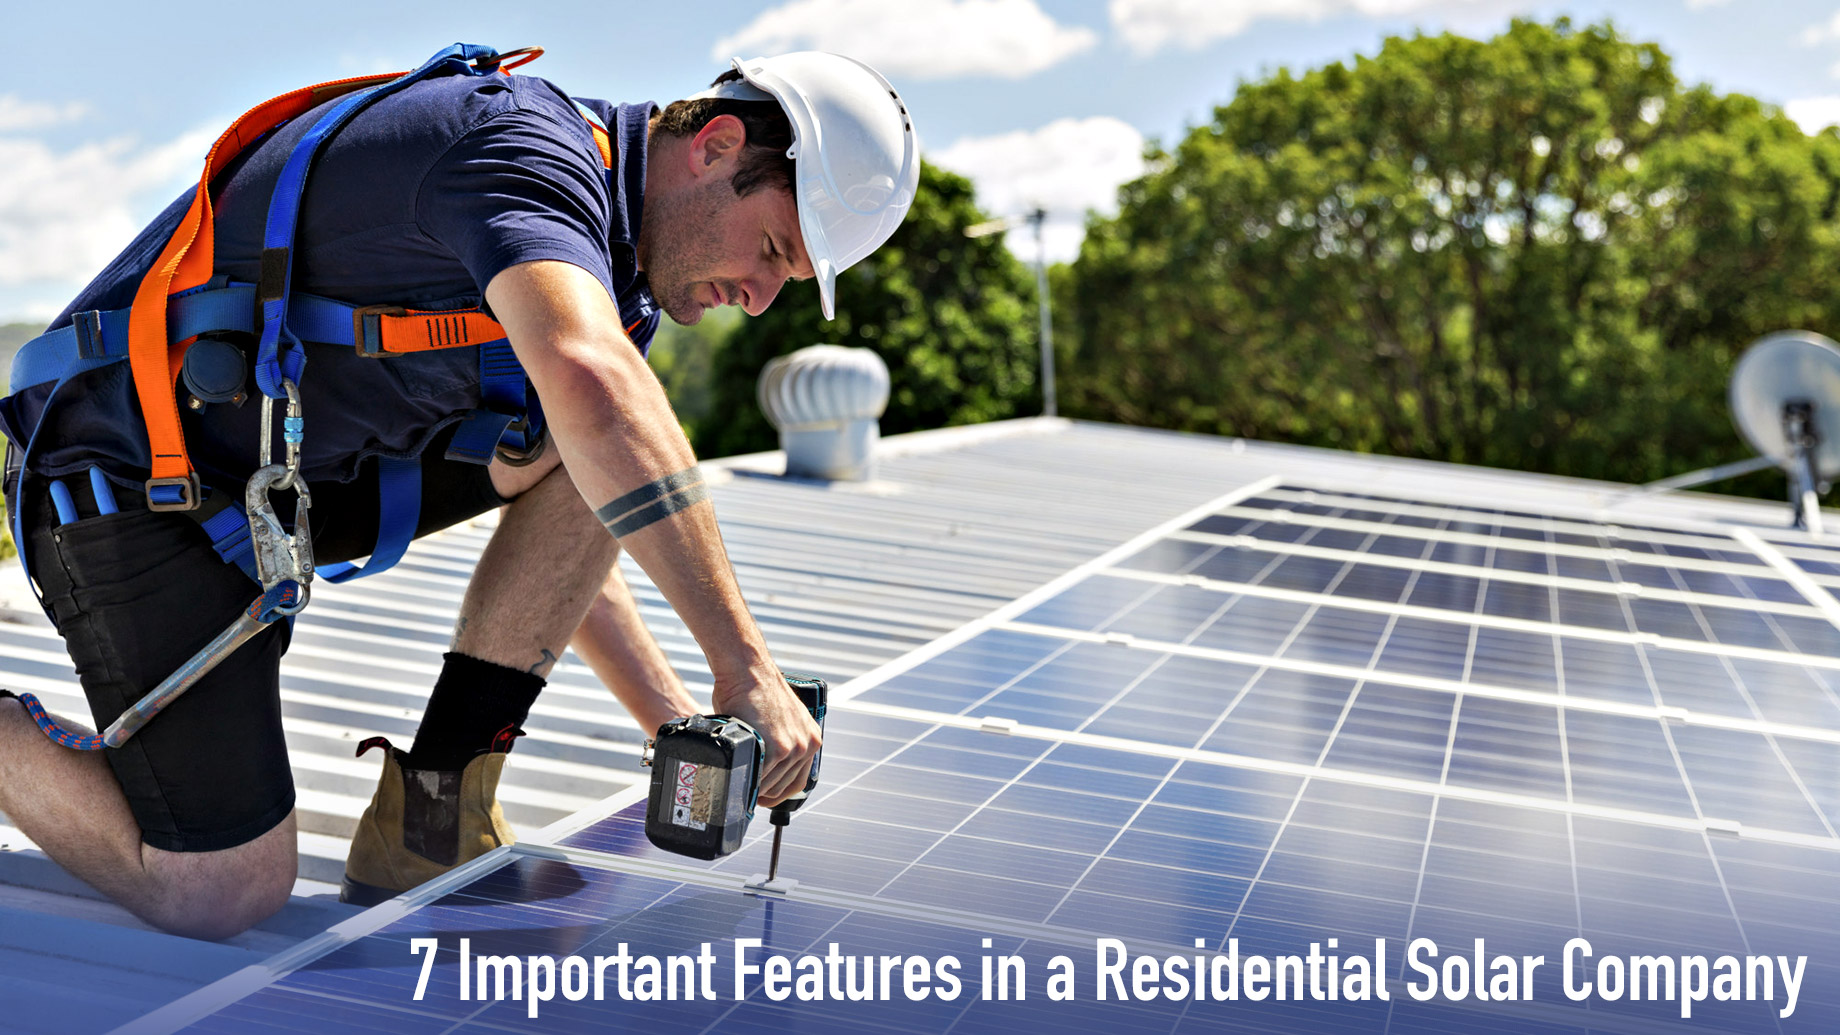 7 Important Features in a Residential Solar Company